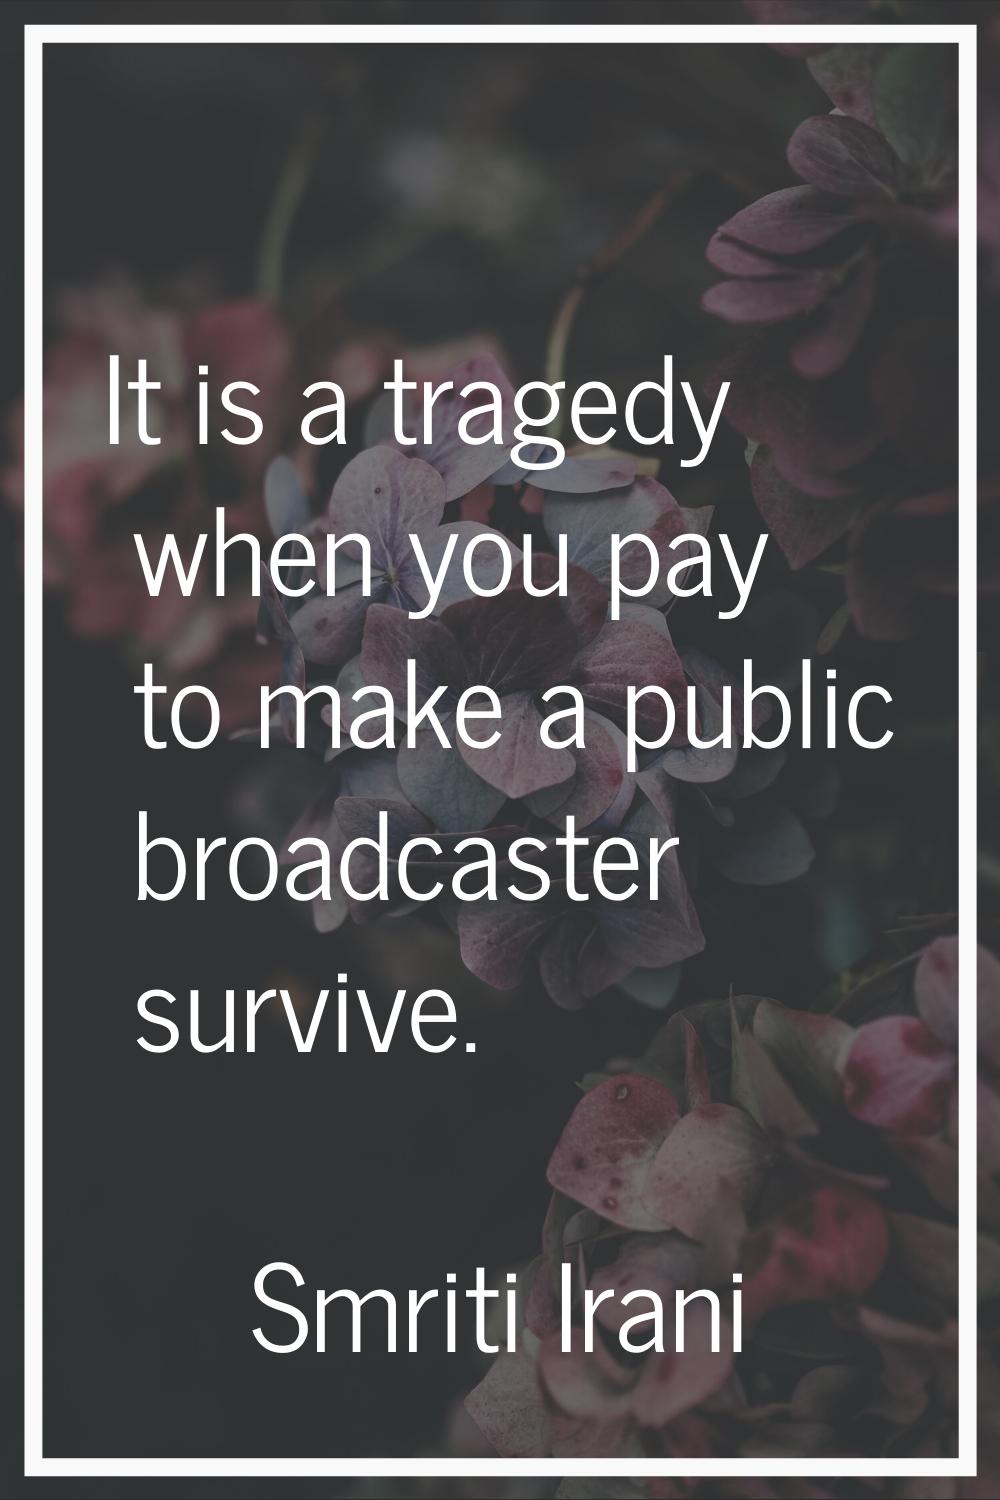 It is a tragedy when you pay to make a public broadcaster survive.